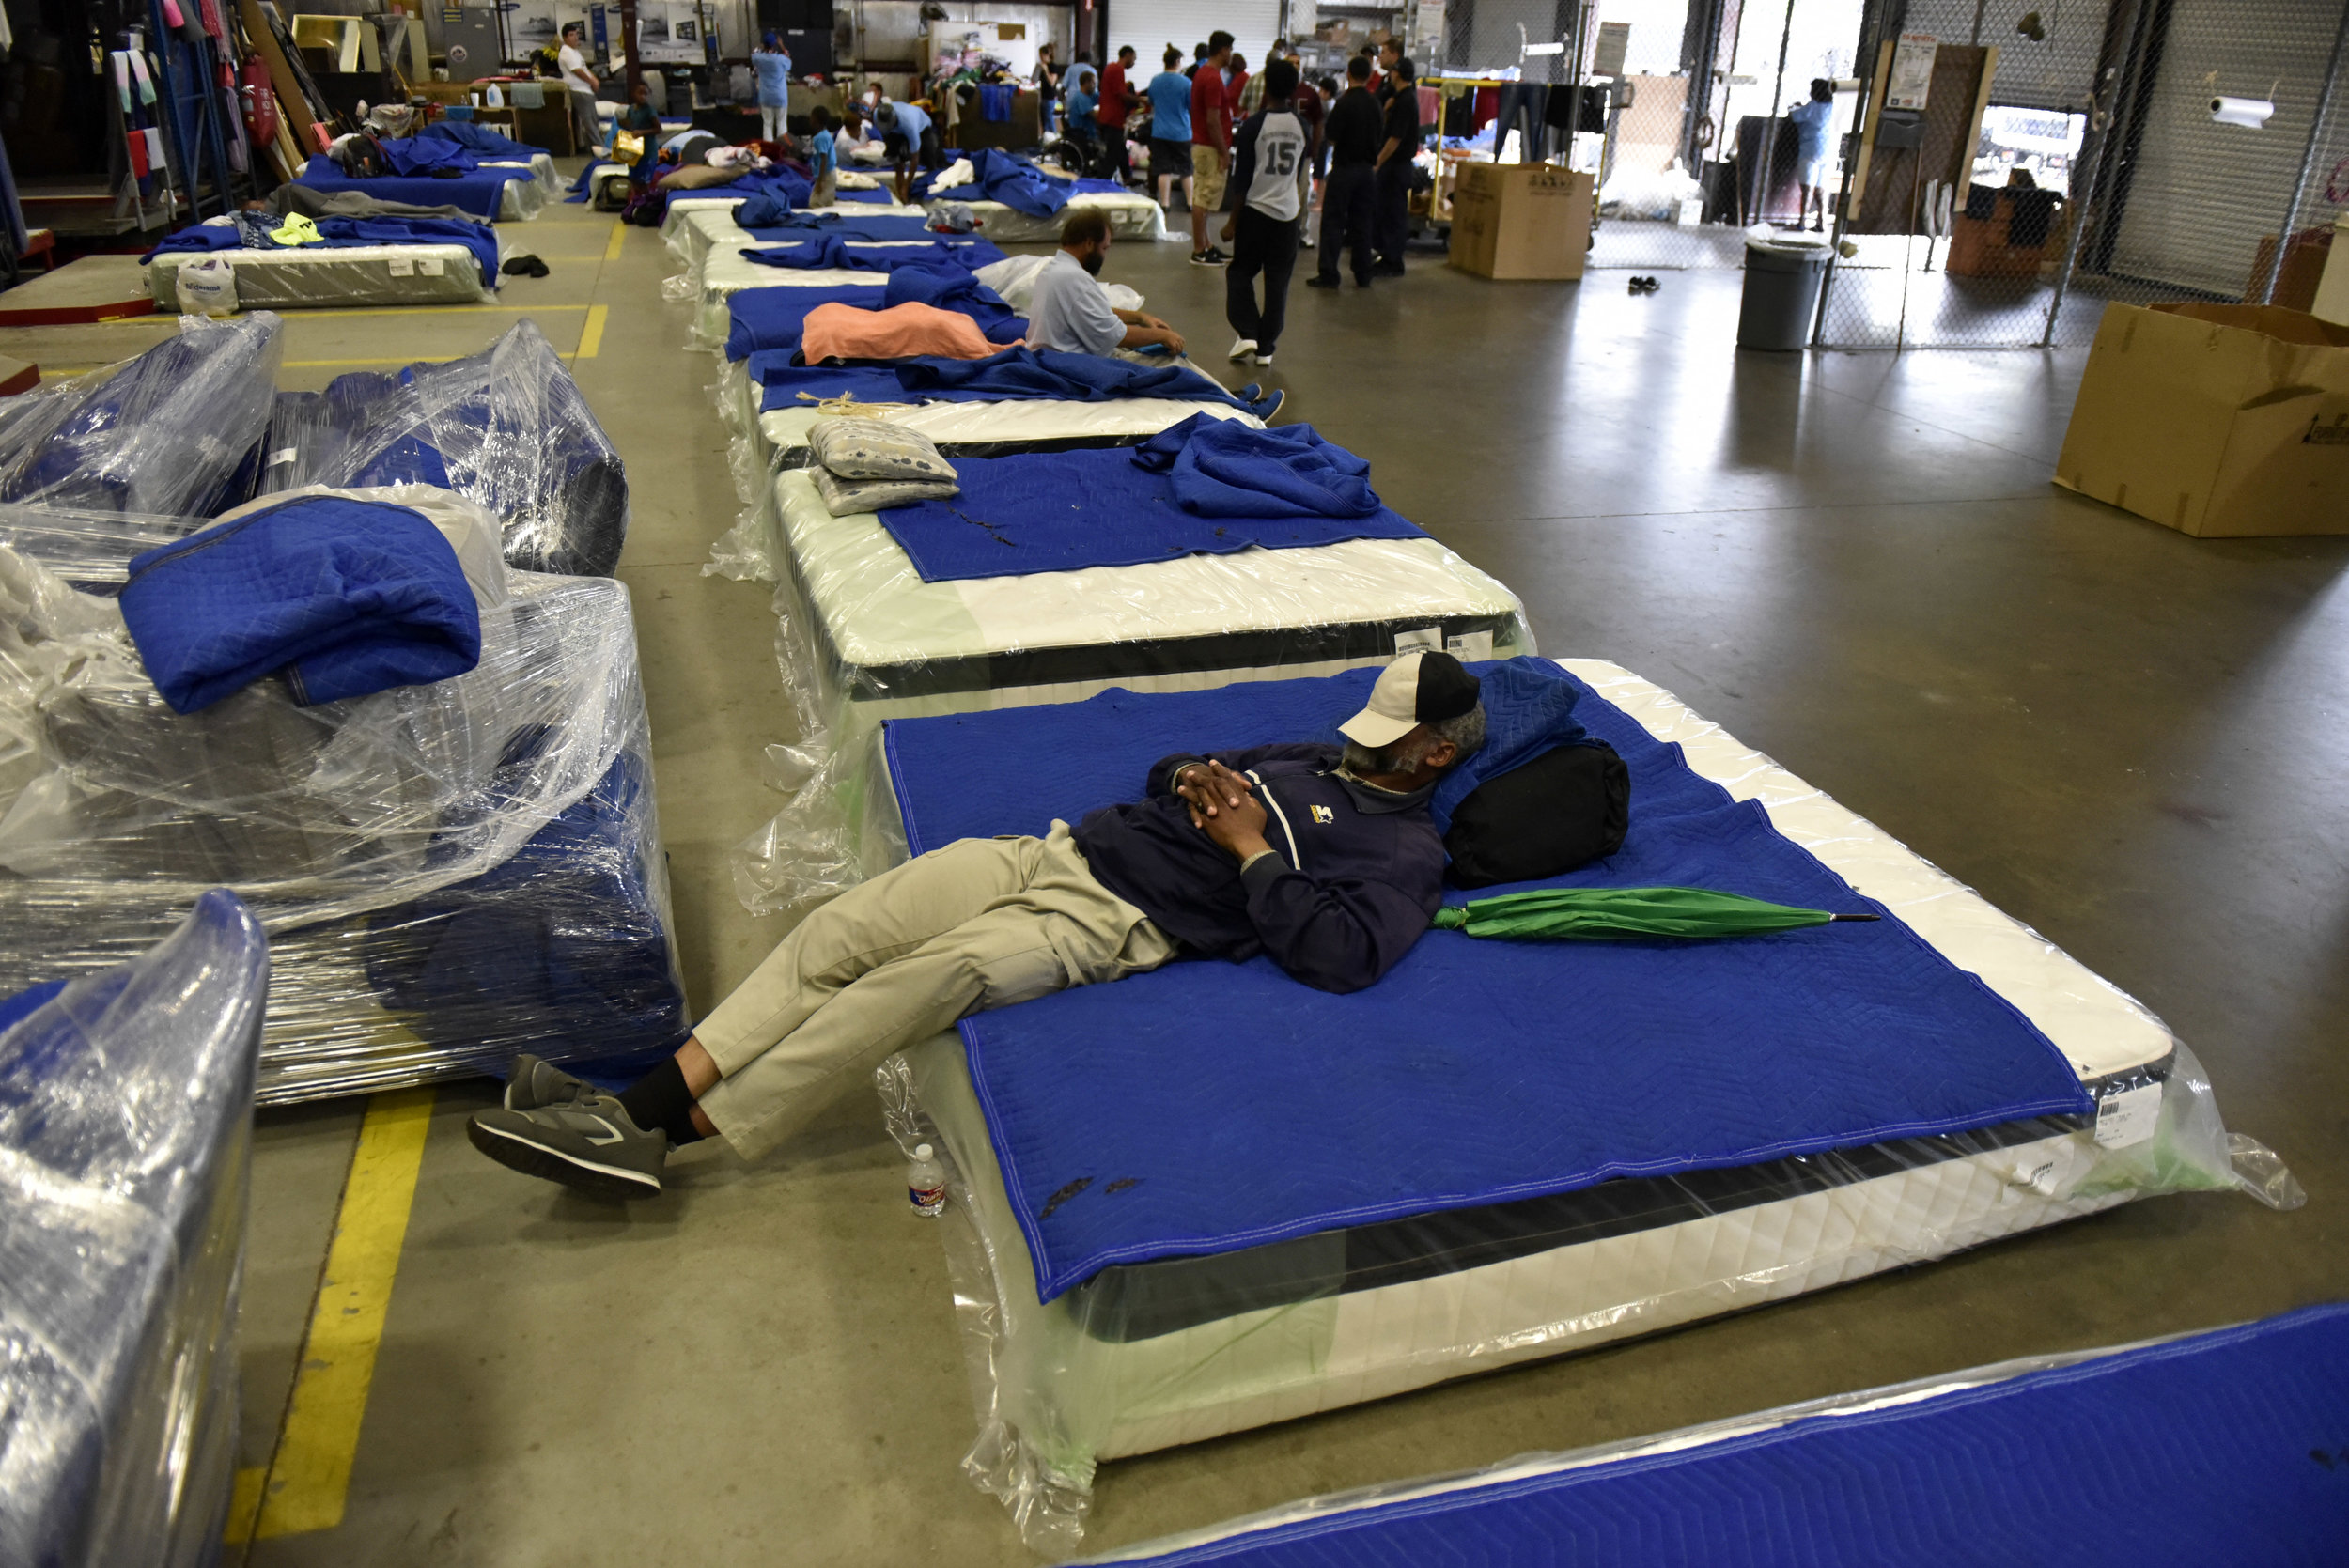  Evacuees get some rest in the warehouse at Gallery Furniture which opened its doors to residents needing shelter, in Houston, Texas, U.S. August 29, 2017.  REUTERS/Nick Oxford 